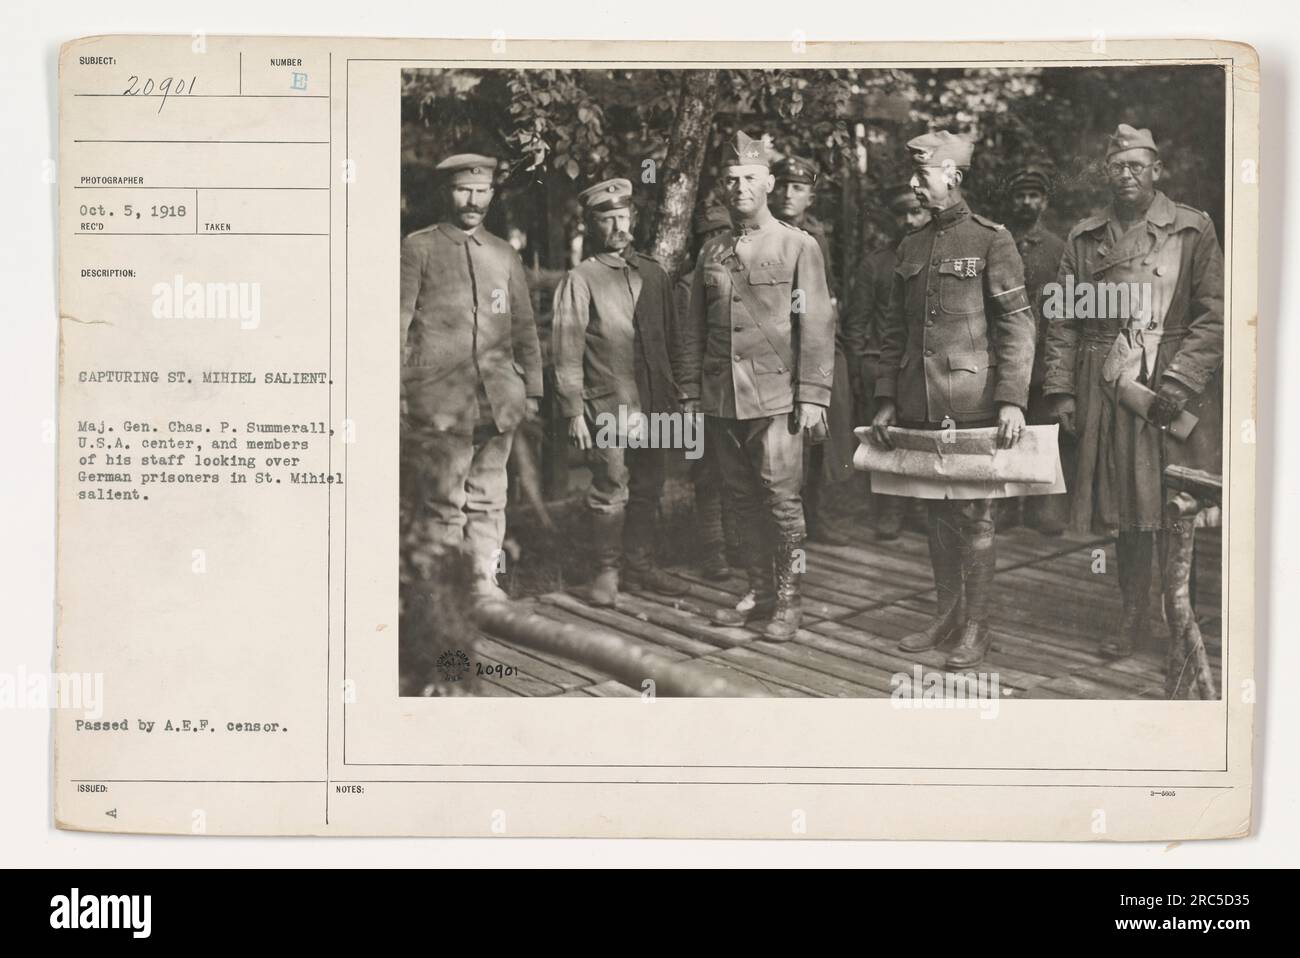 Major General Charles P. Summerall, alongside his staff, examines German prisoners captured during the capture of the St. Mihiel Salient. This historical photograph was taken on October 5, 1918, and has been verified by the A.E.P. censor. Stock Photo